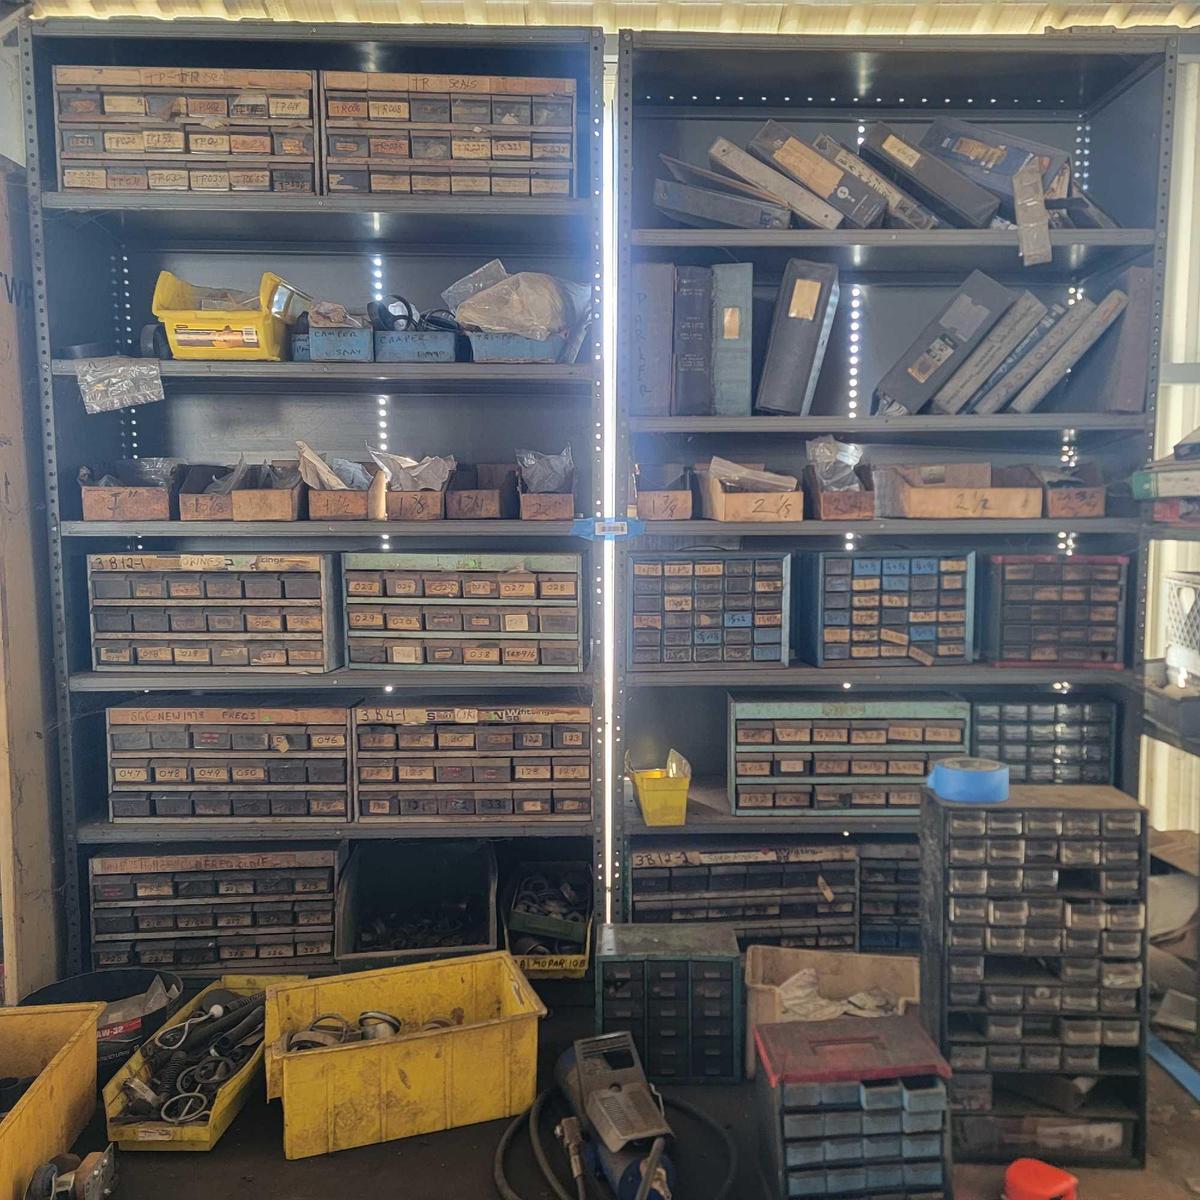 Storage Full of Hydraulic Components, Seals and Gaskets, Metals and Materials, Tools